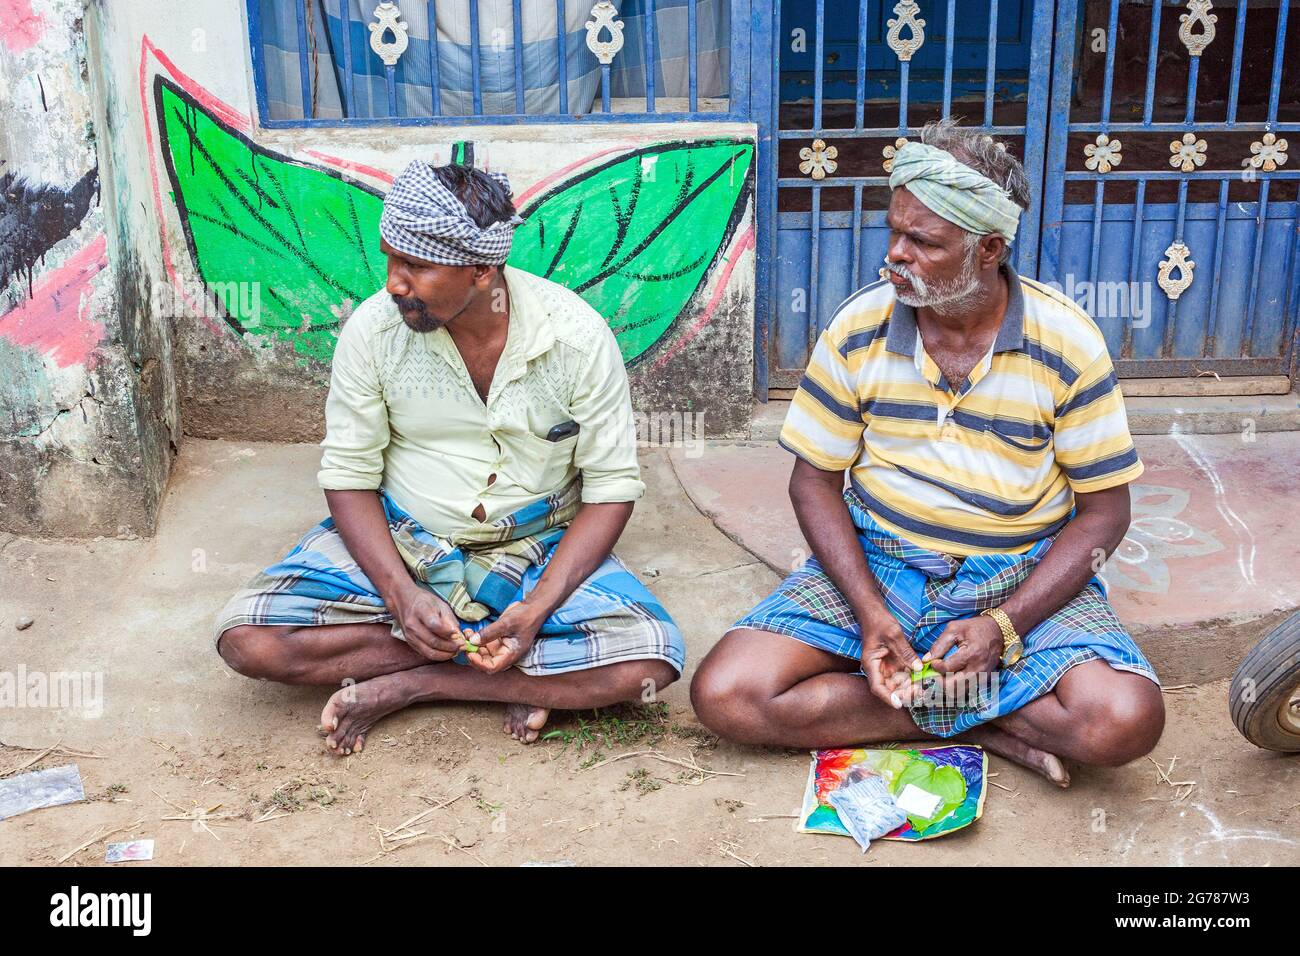 Two Indian male betel nut traders wearing lunghis seated on ground with betel leaf painted on wall behind them, Tamil Nadu, India Stock Photo